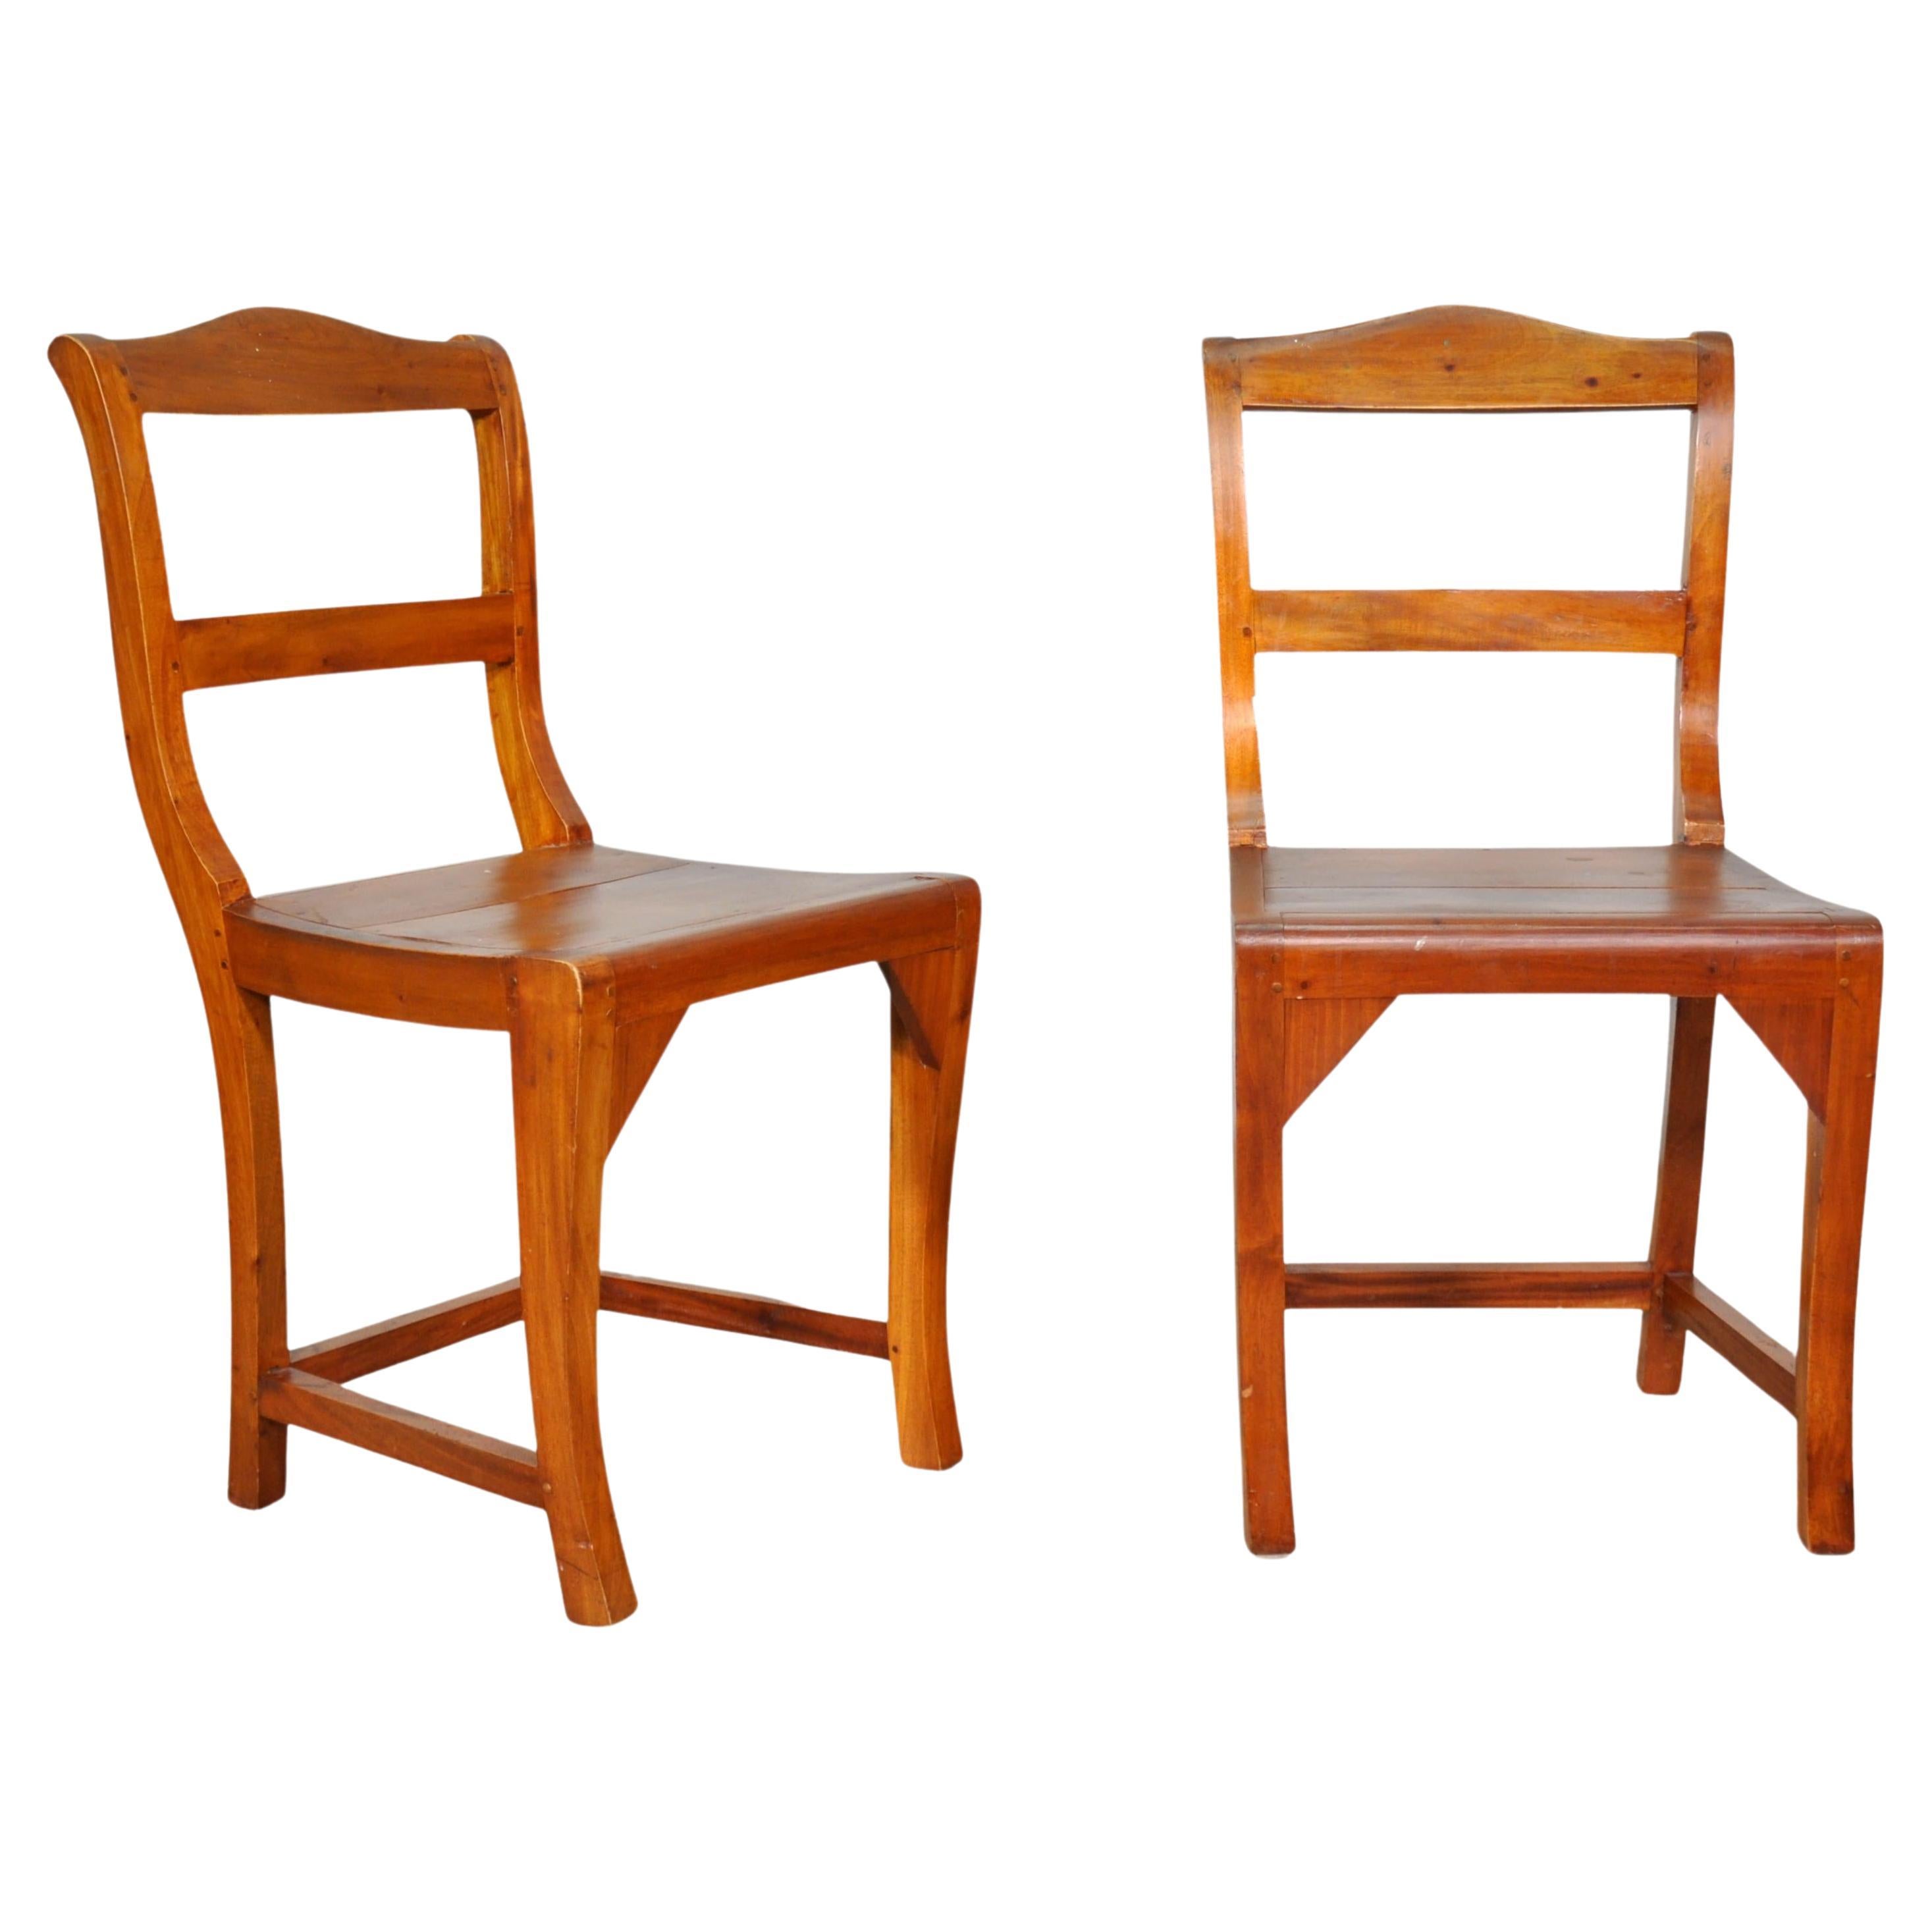 French Country Rustic Side Chairs - a Pair